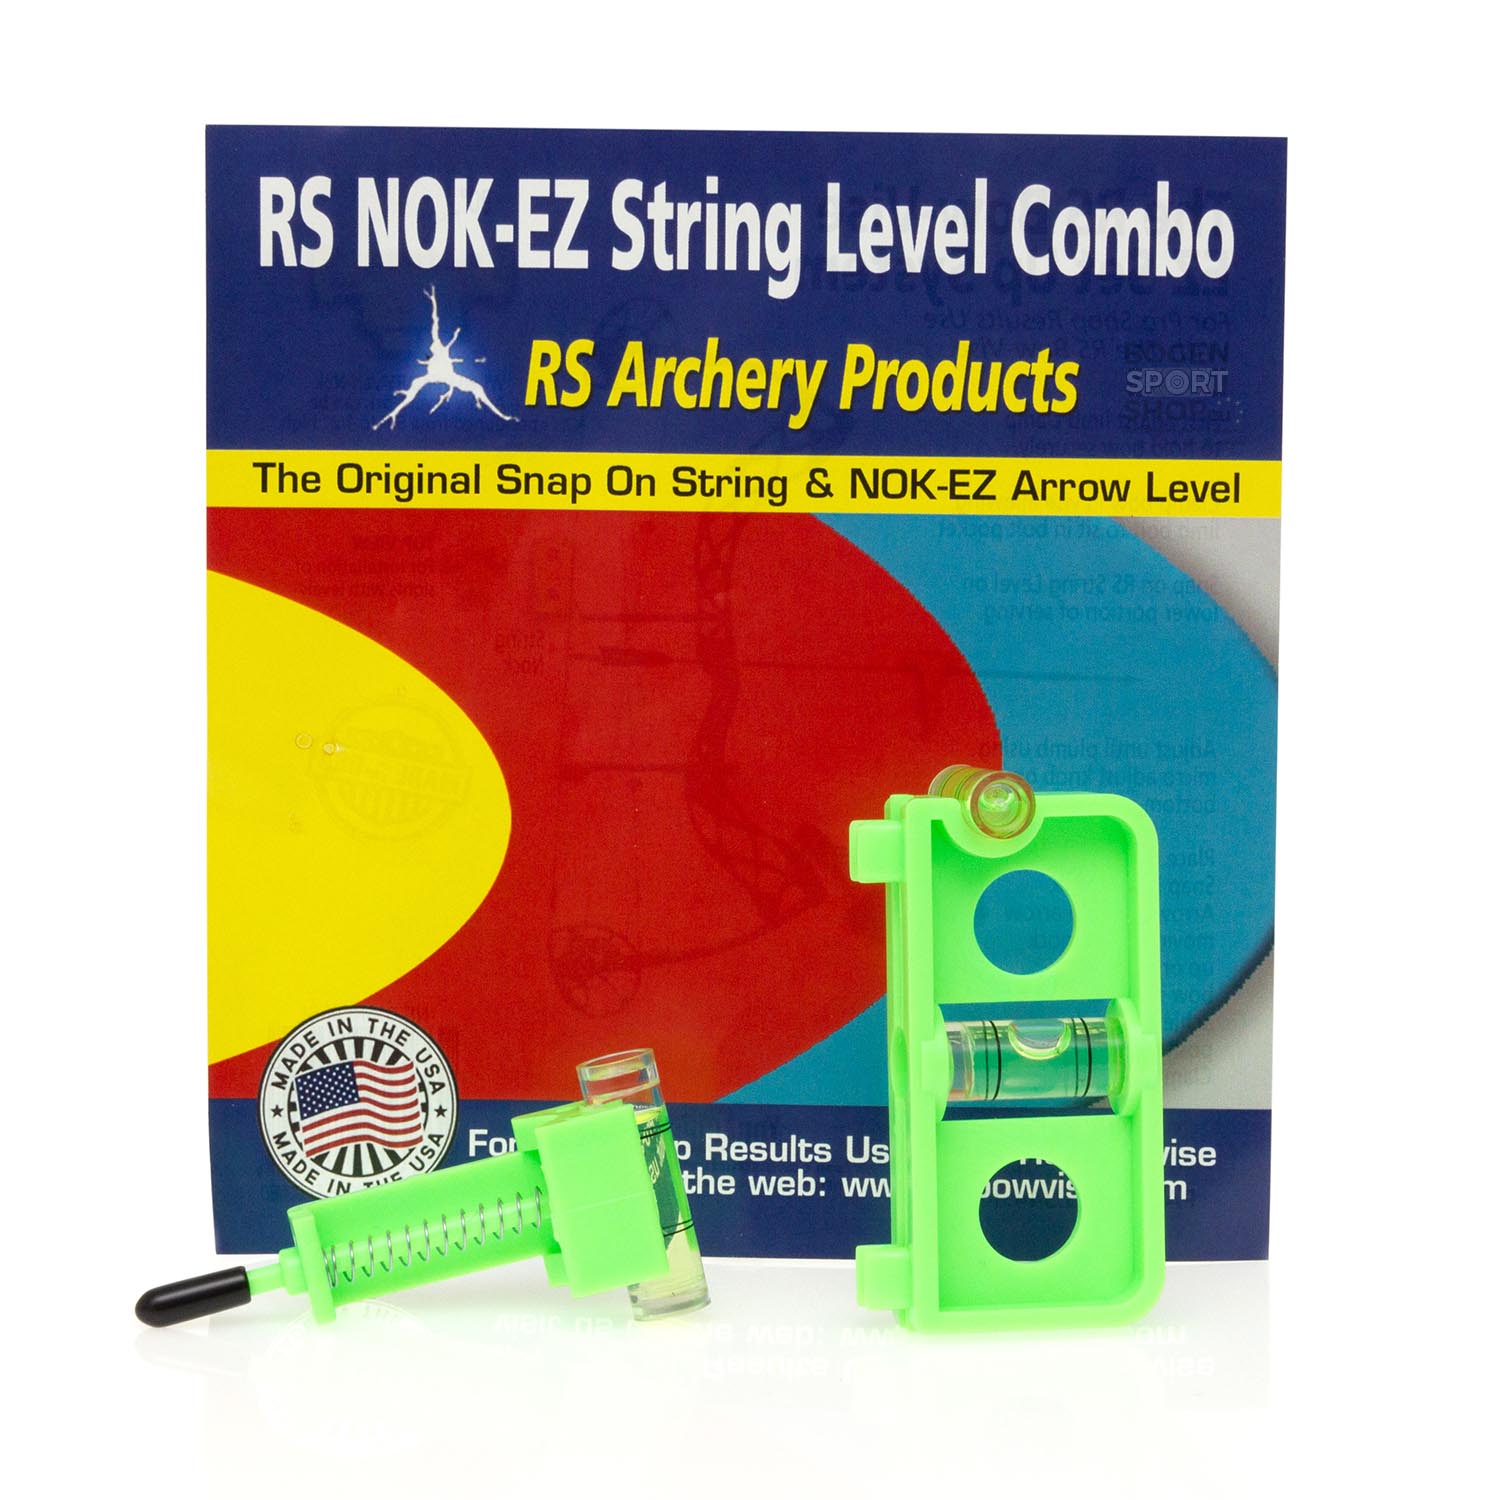  Buy RS Archery Products NOK-EZ & String Level